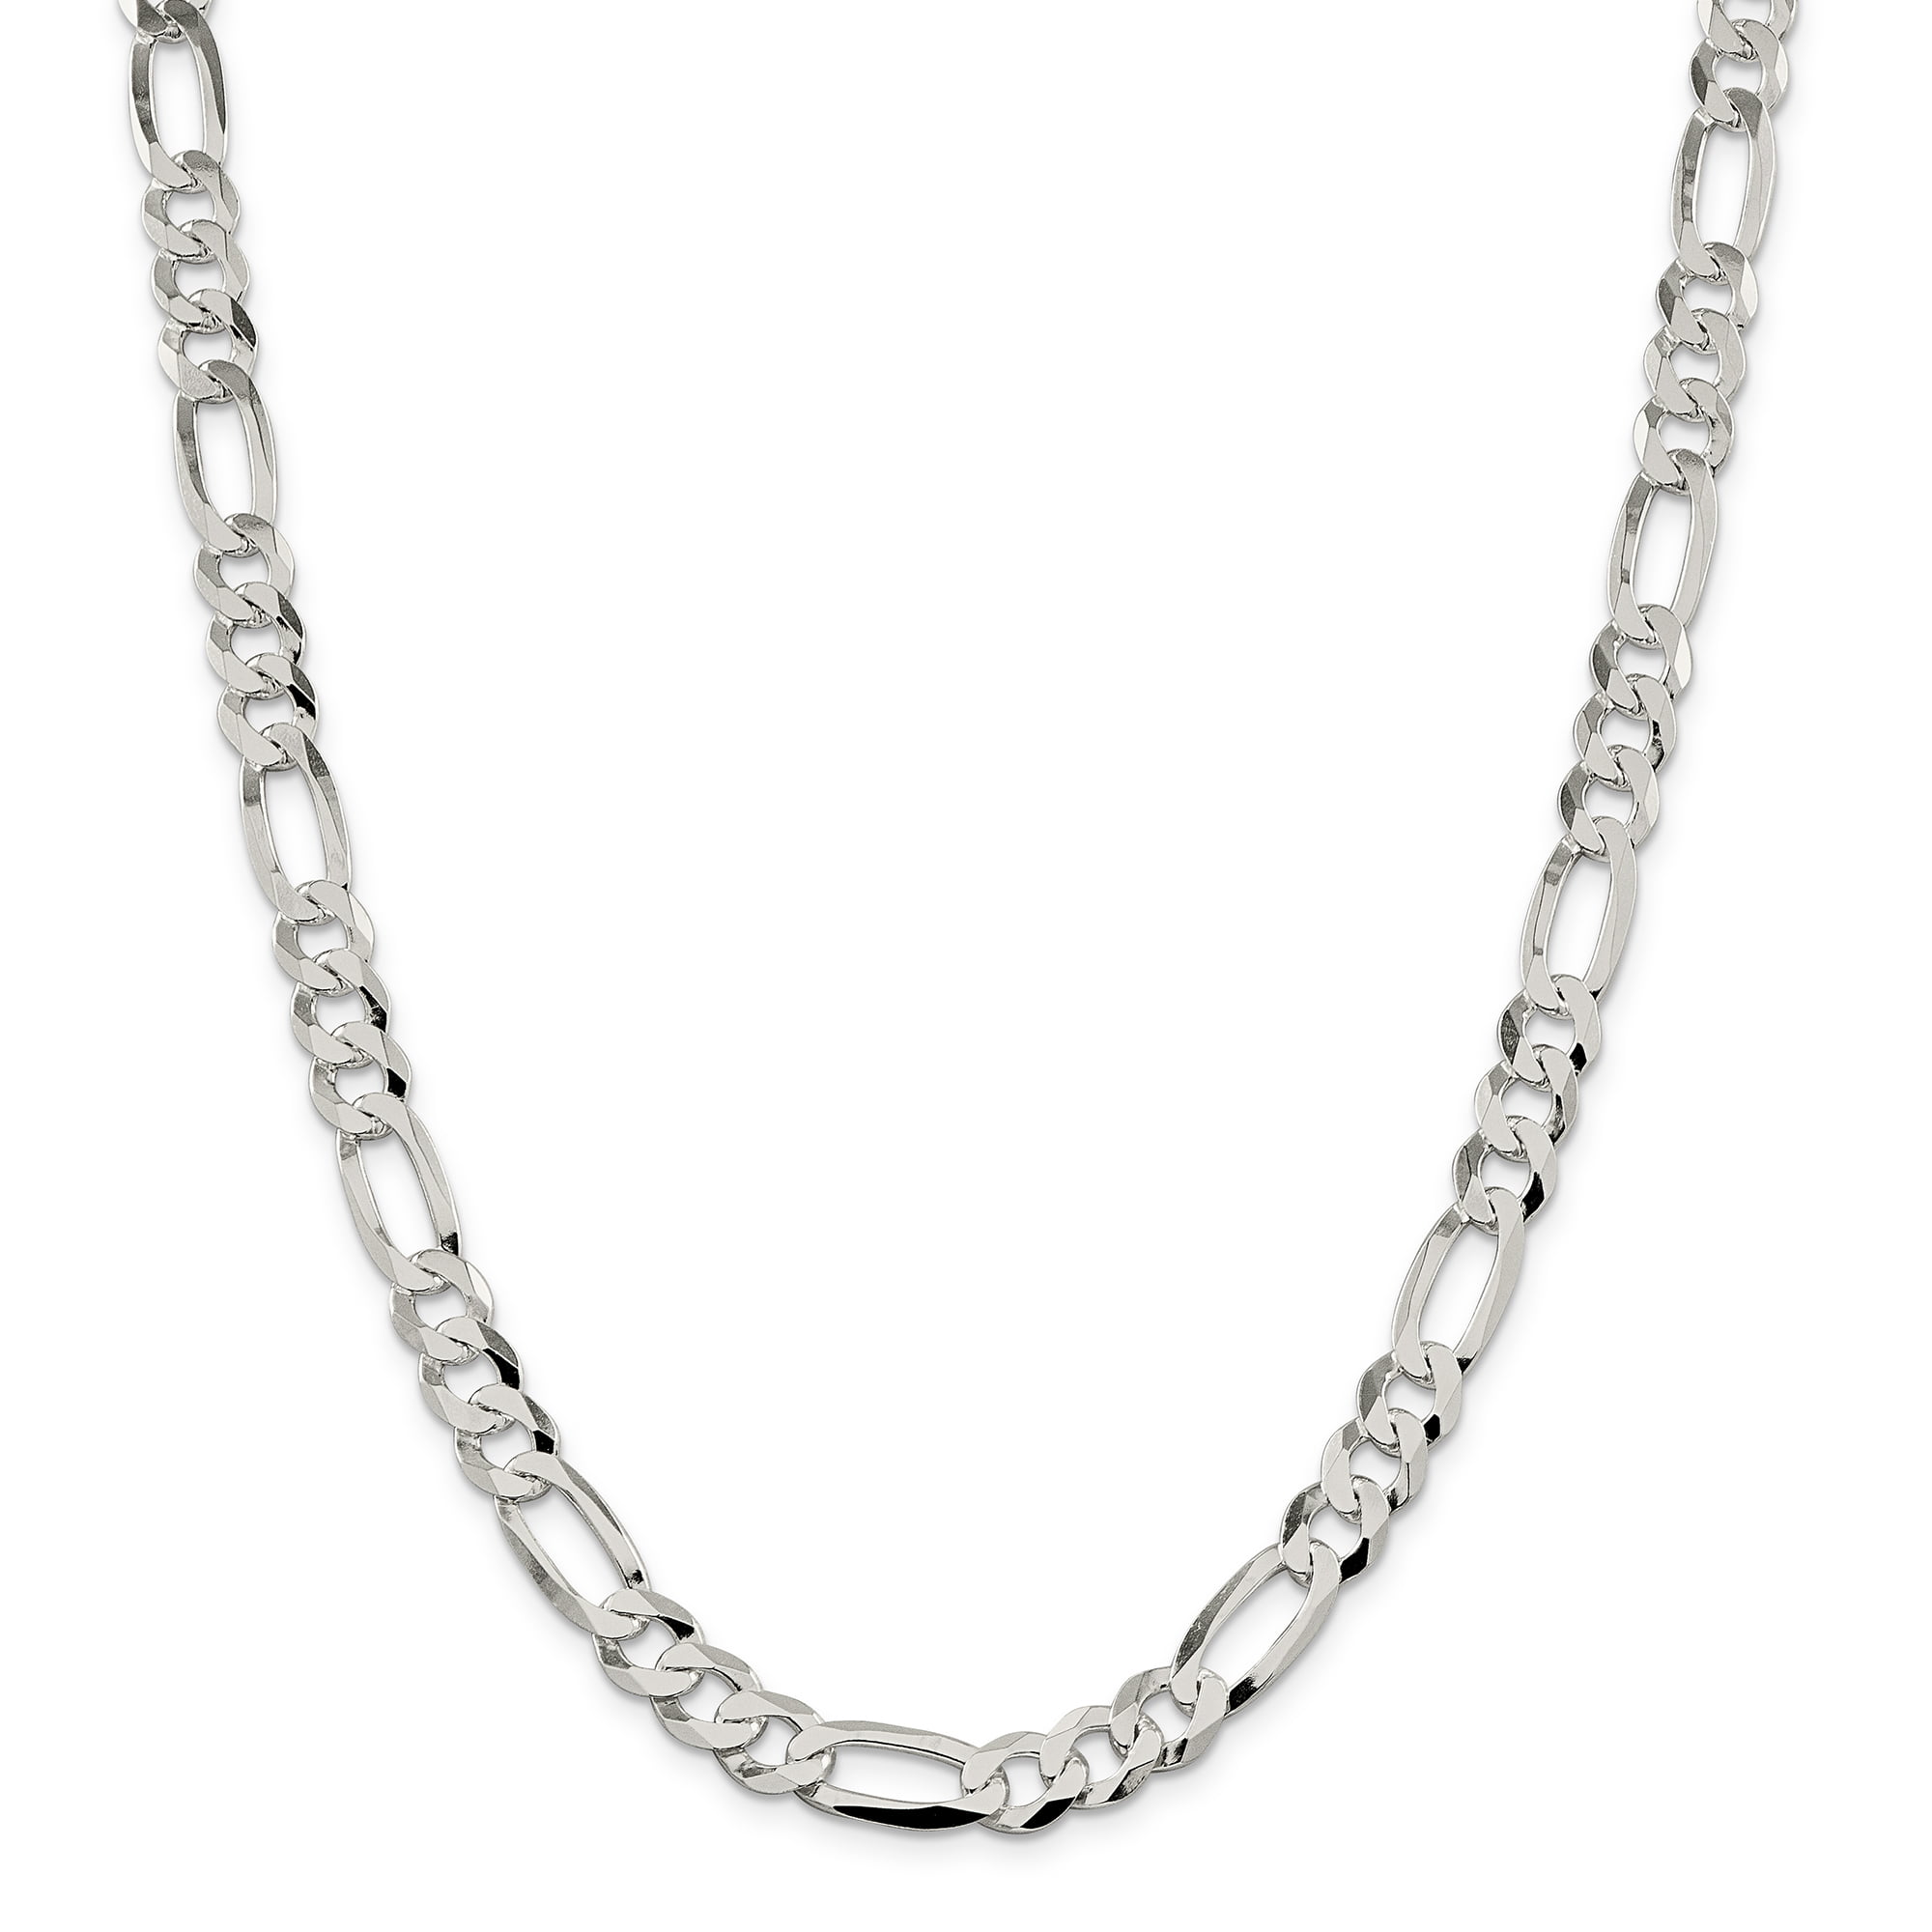 Beautiful Sterling Silver 8.5mm Polished Flat Figaro Chain